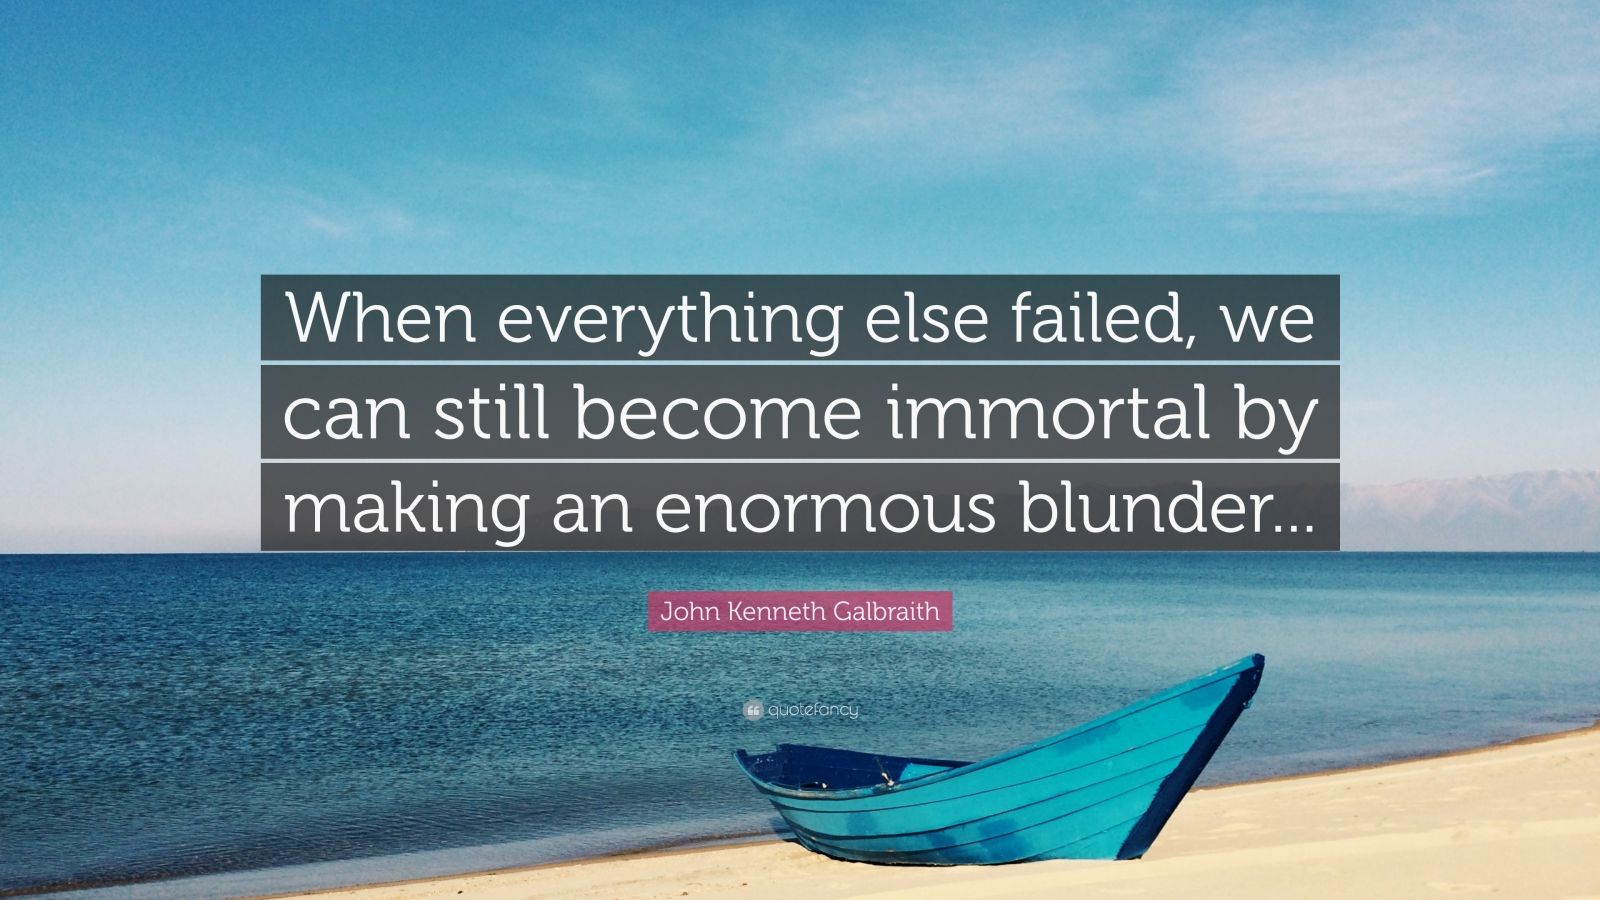 John Kenneth Galbraith Quote: “When everything else failed, we can ...